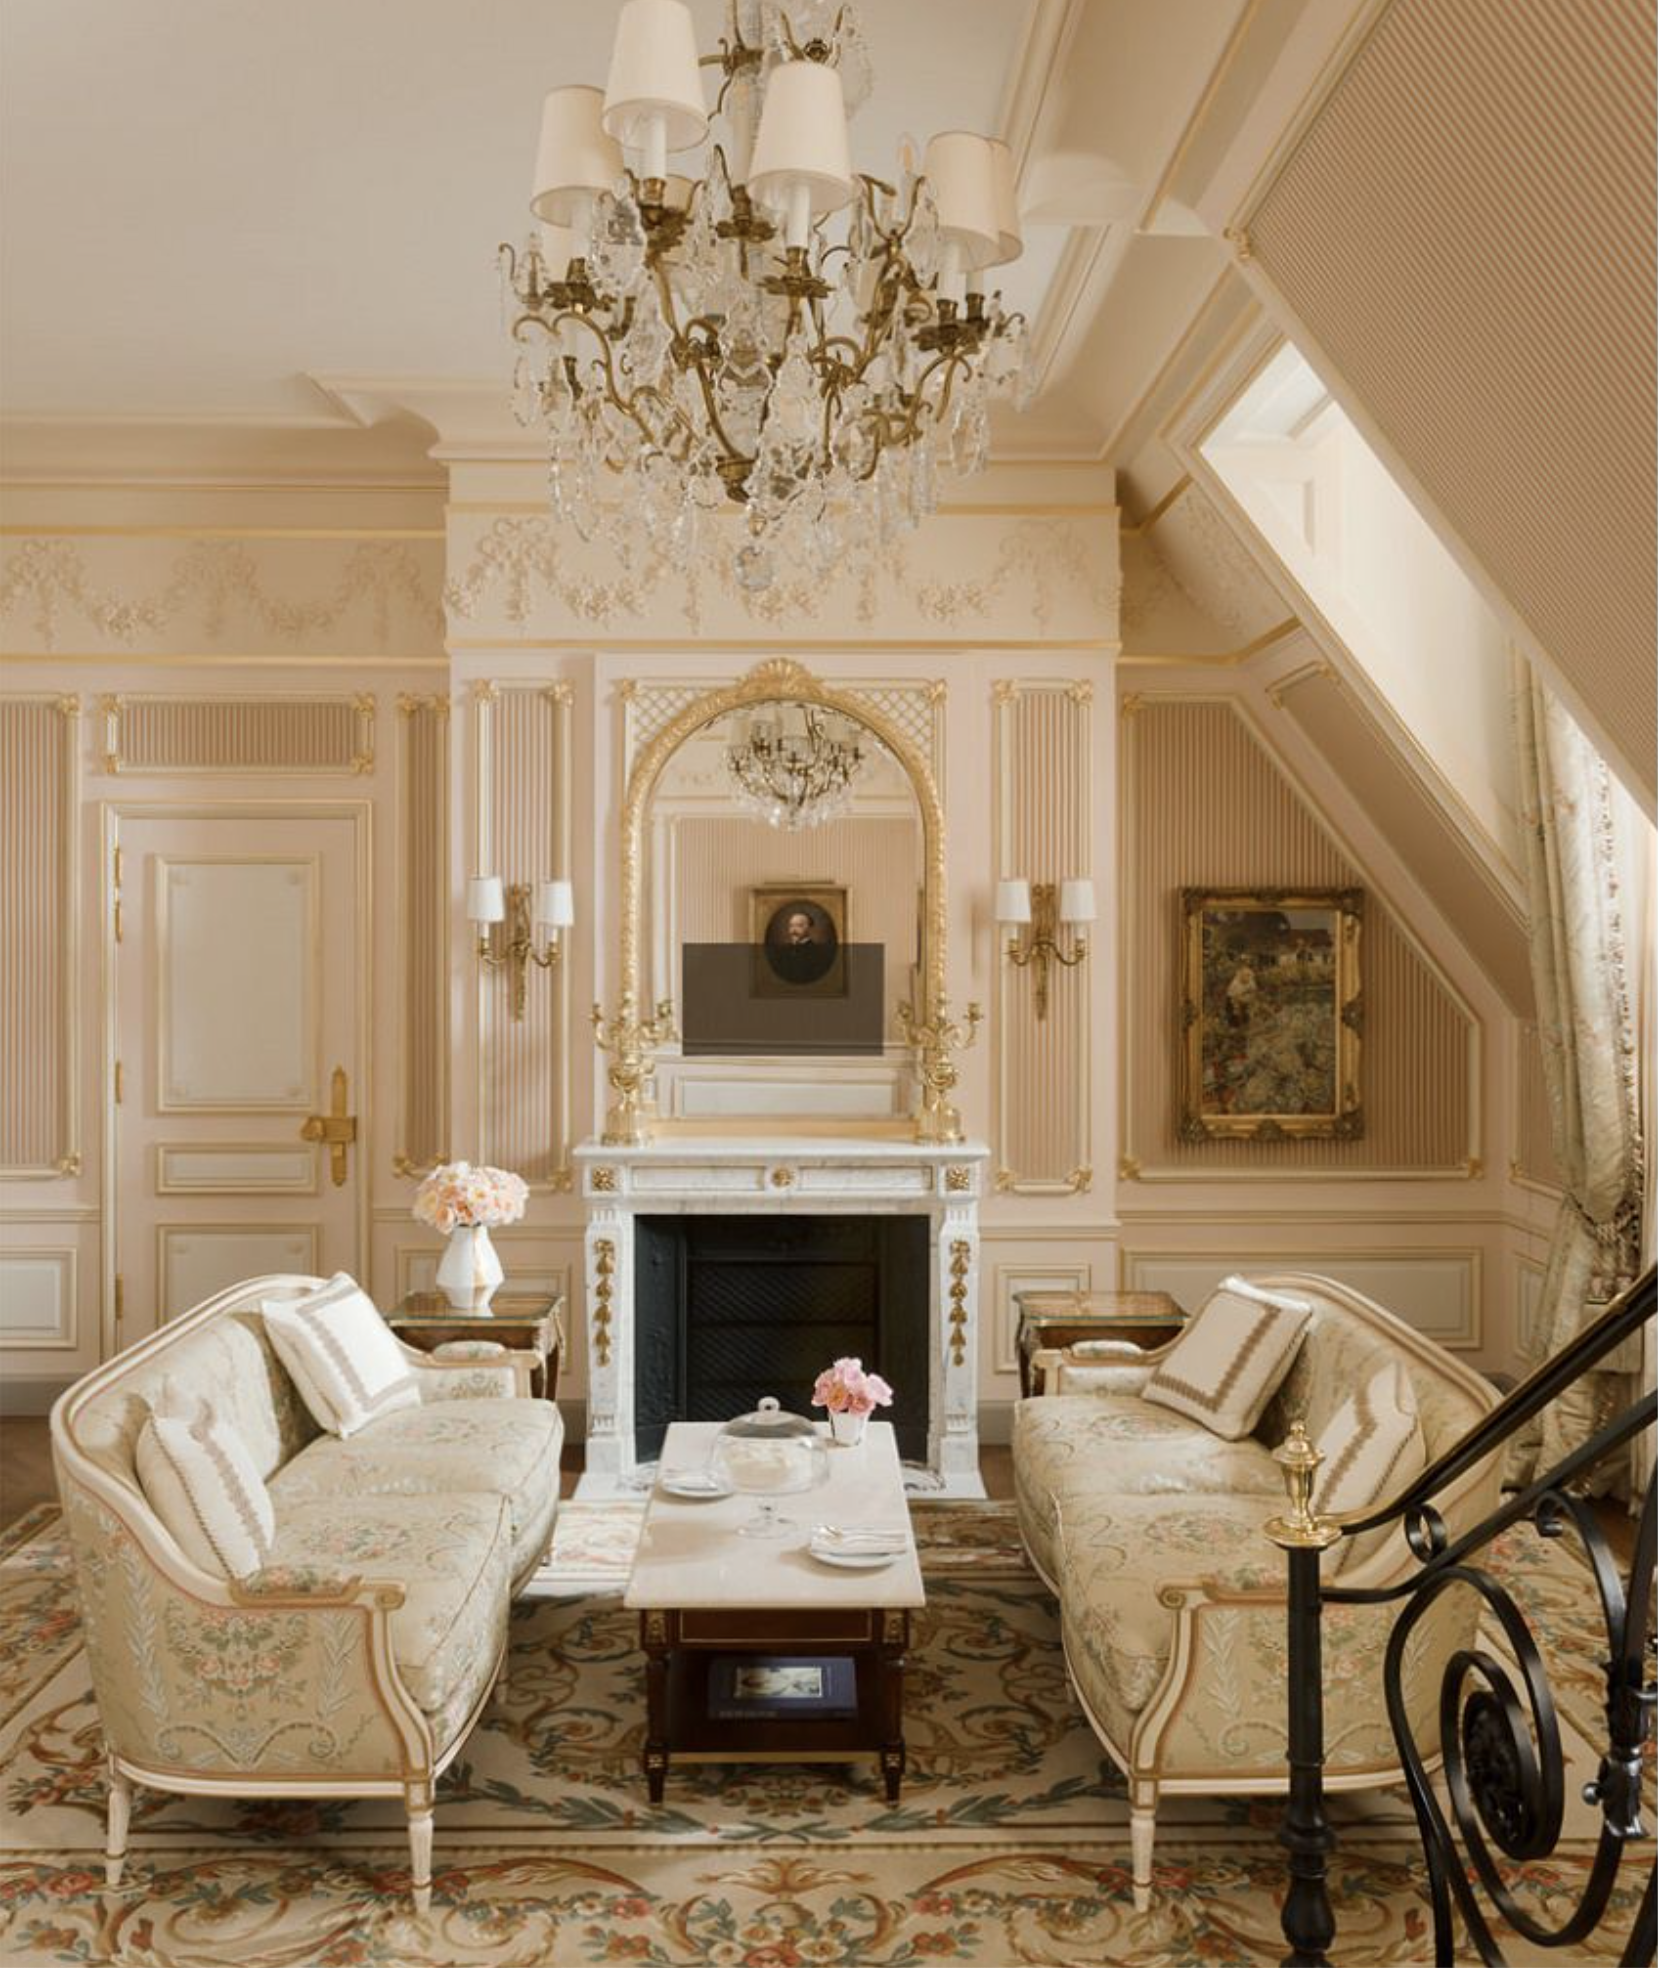 The living area of Suite César Ritz at Ritz Paris with antique sofas upholstered with patterned silk fabric sitting in front of a grand fireplace, gilt mirror and ornately molded walls in a cream and pale pink scheme